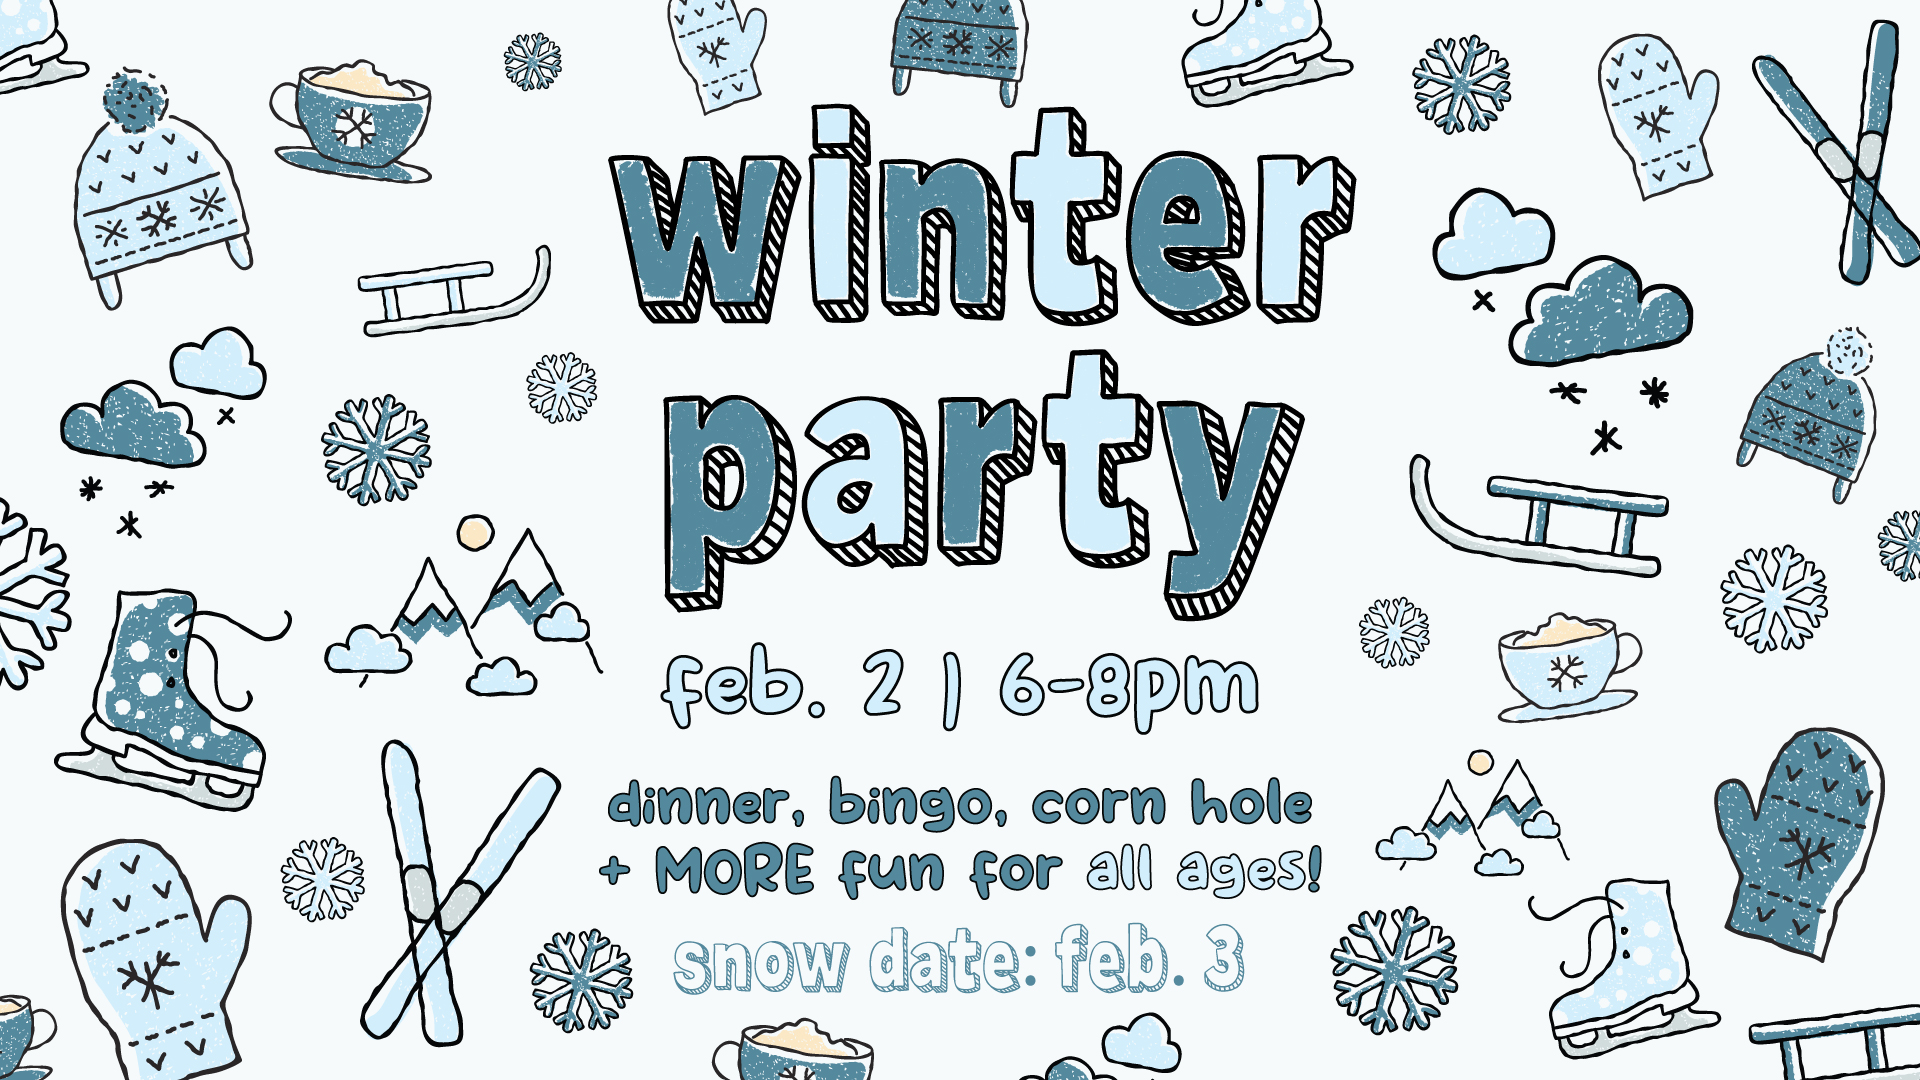 Winter Party | Feb. 2 from 6-8pm | Dinner, bingo, corn hole and more fun for all ages! | snow date: Feb. 3